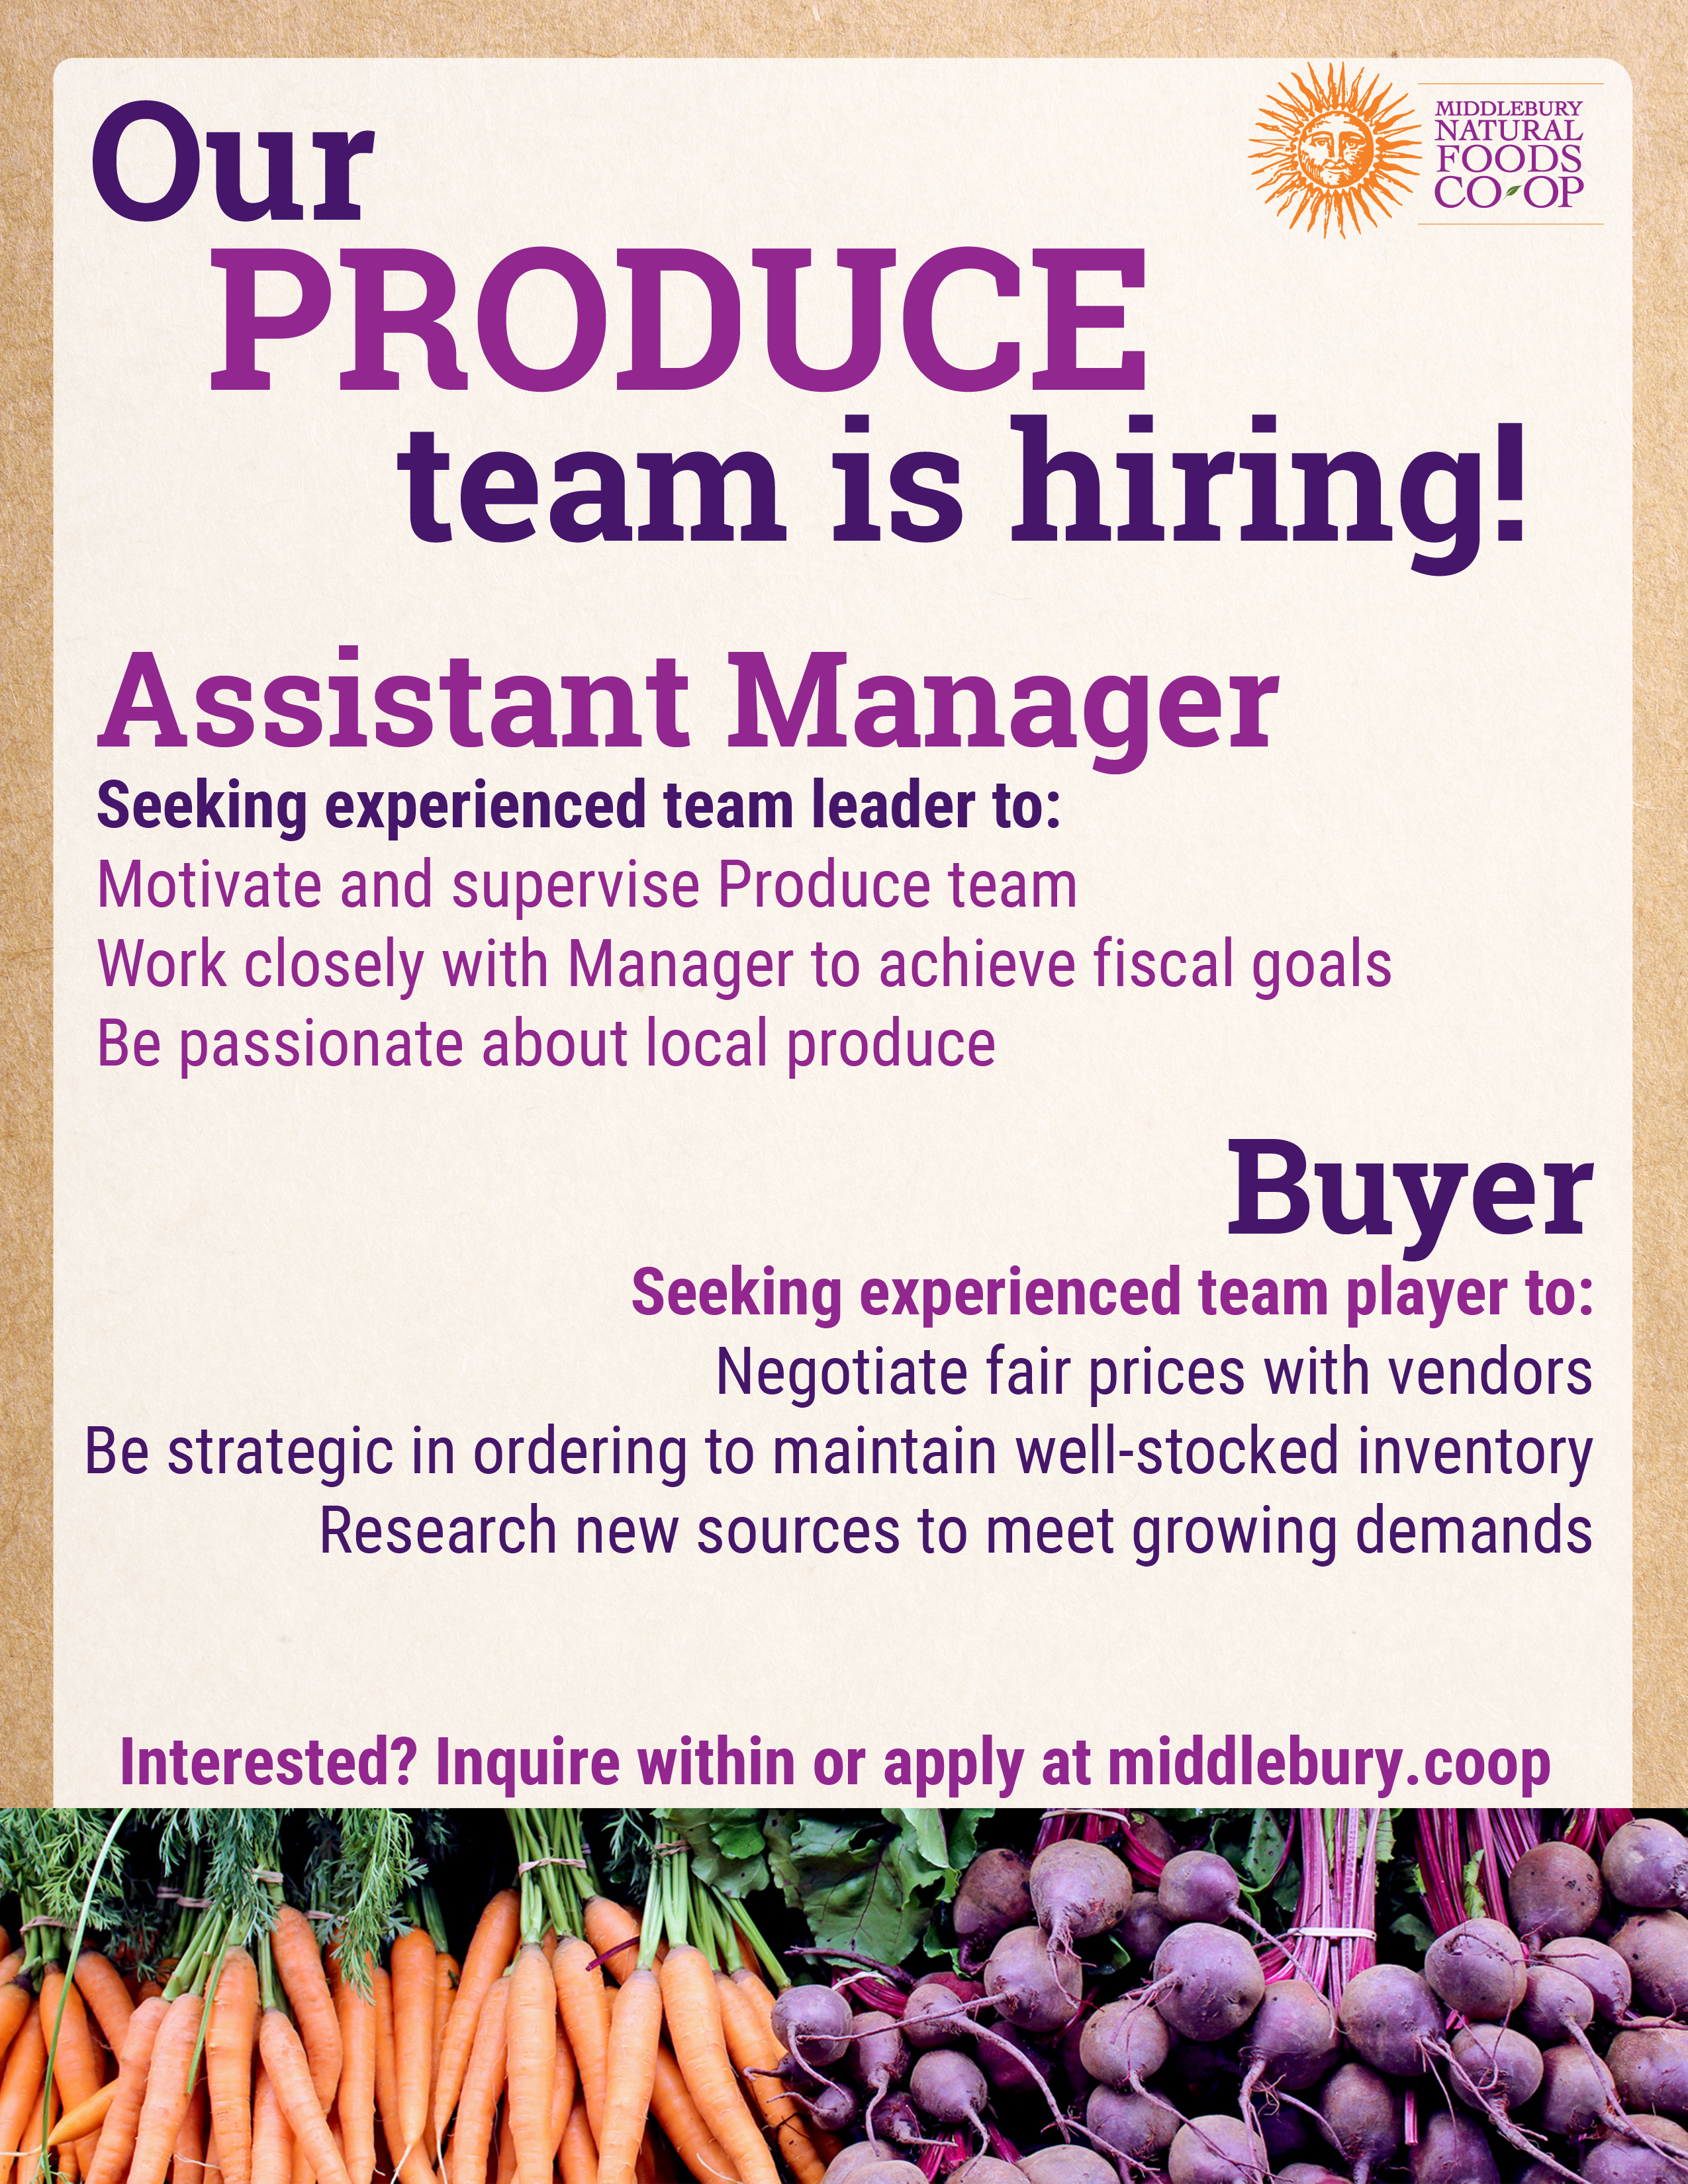 Carrots and beets along with job descriptions for assistant manager and buyer positions